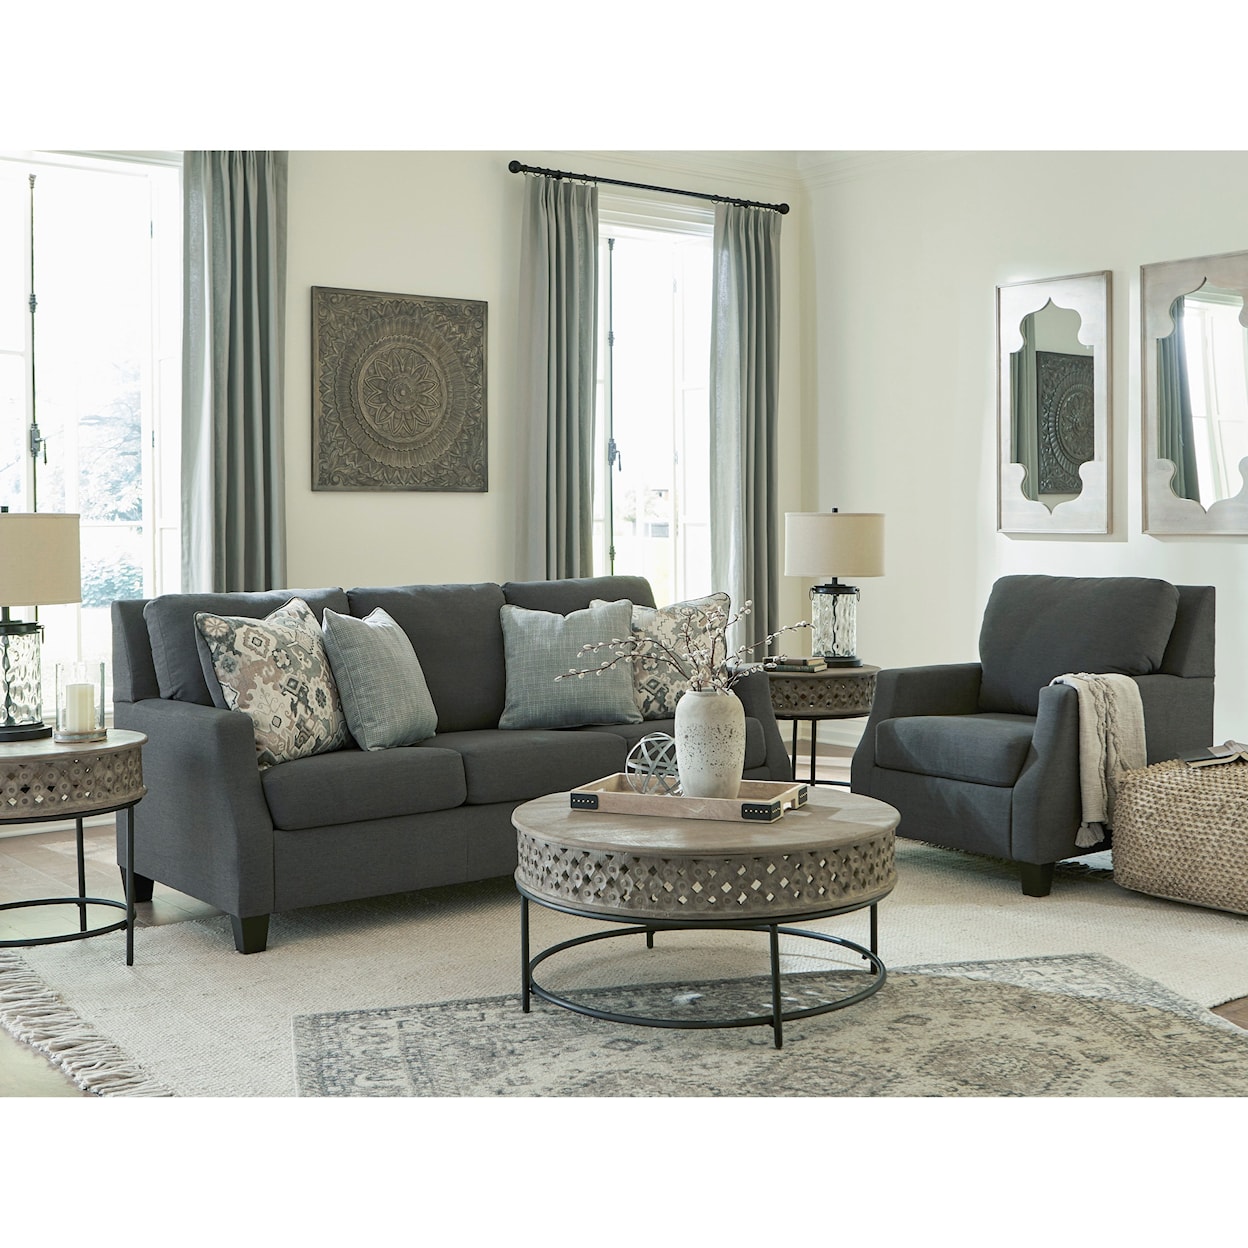 Signature Design by Ashley Bayonne Living Room Group